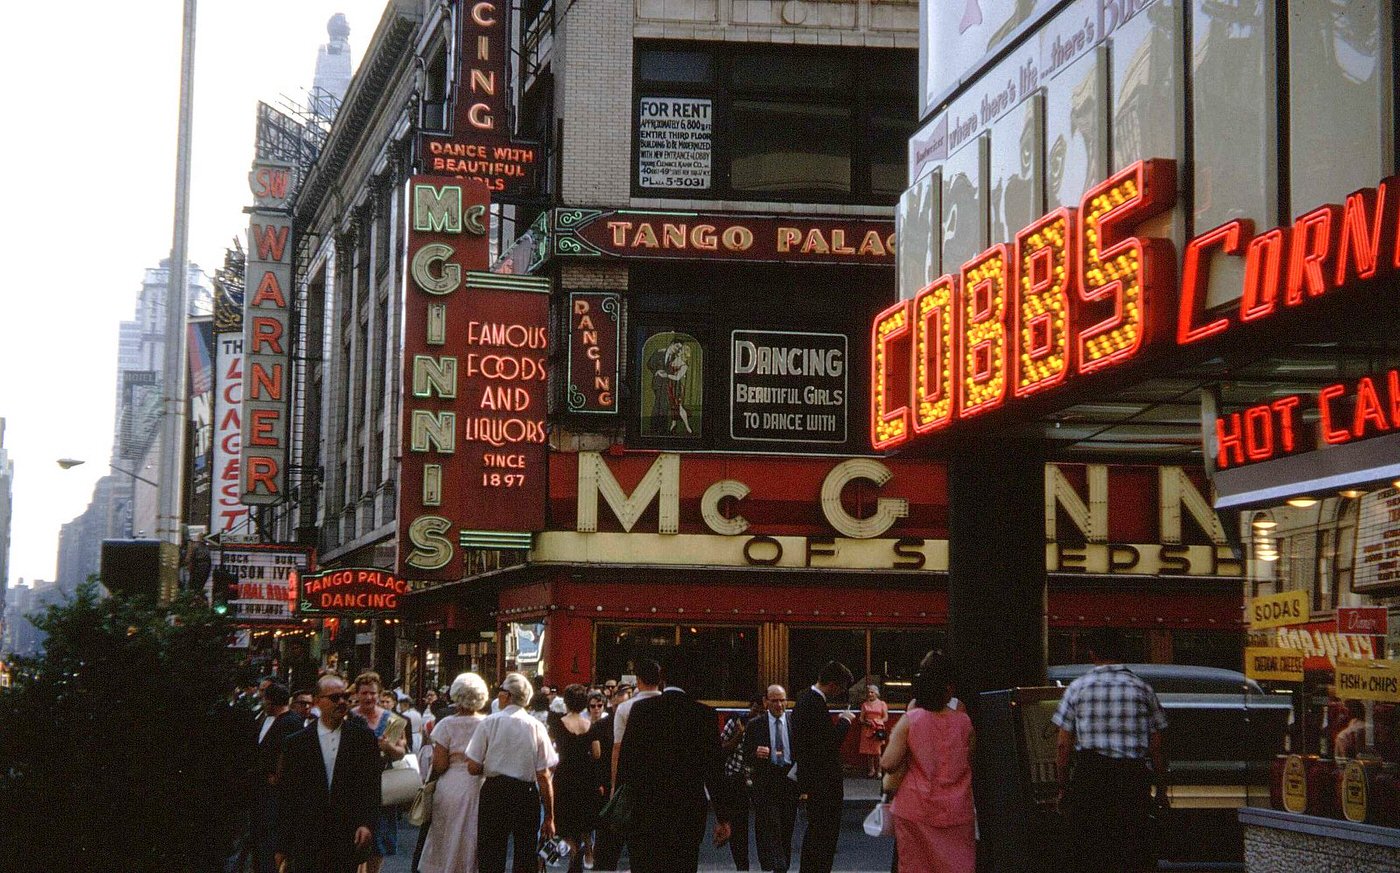 McGinnis Restaurant Tango Palace and Cobbs 48th and Br, 1962